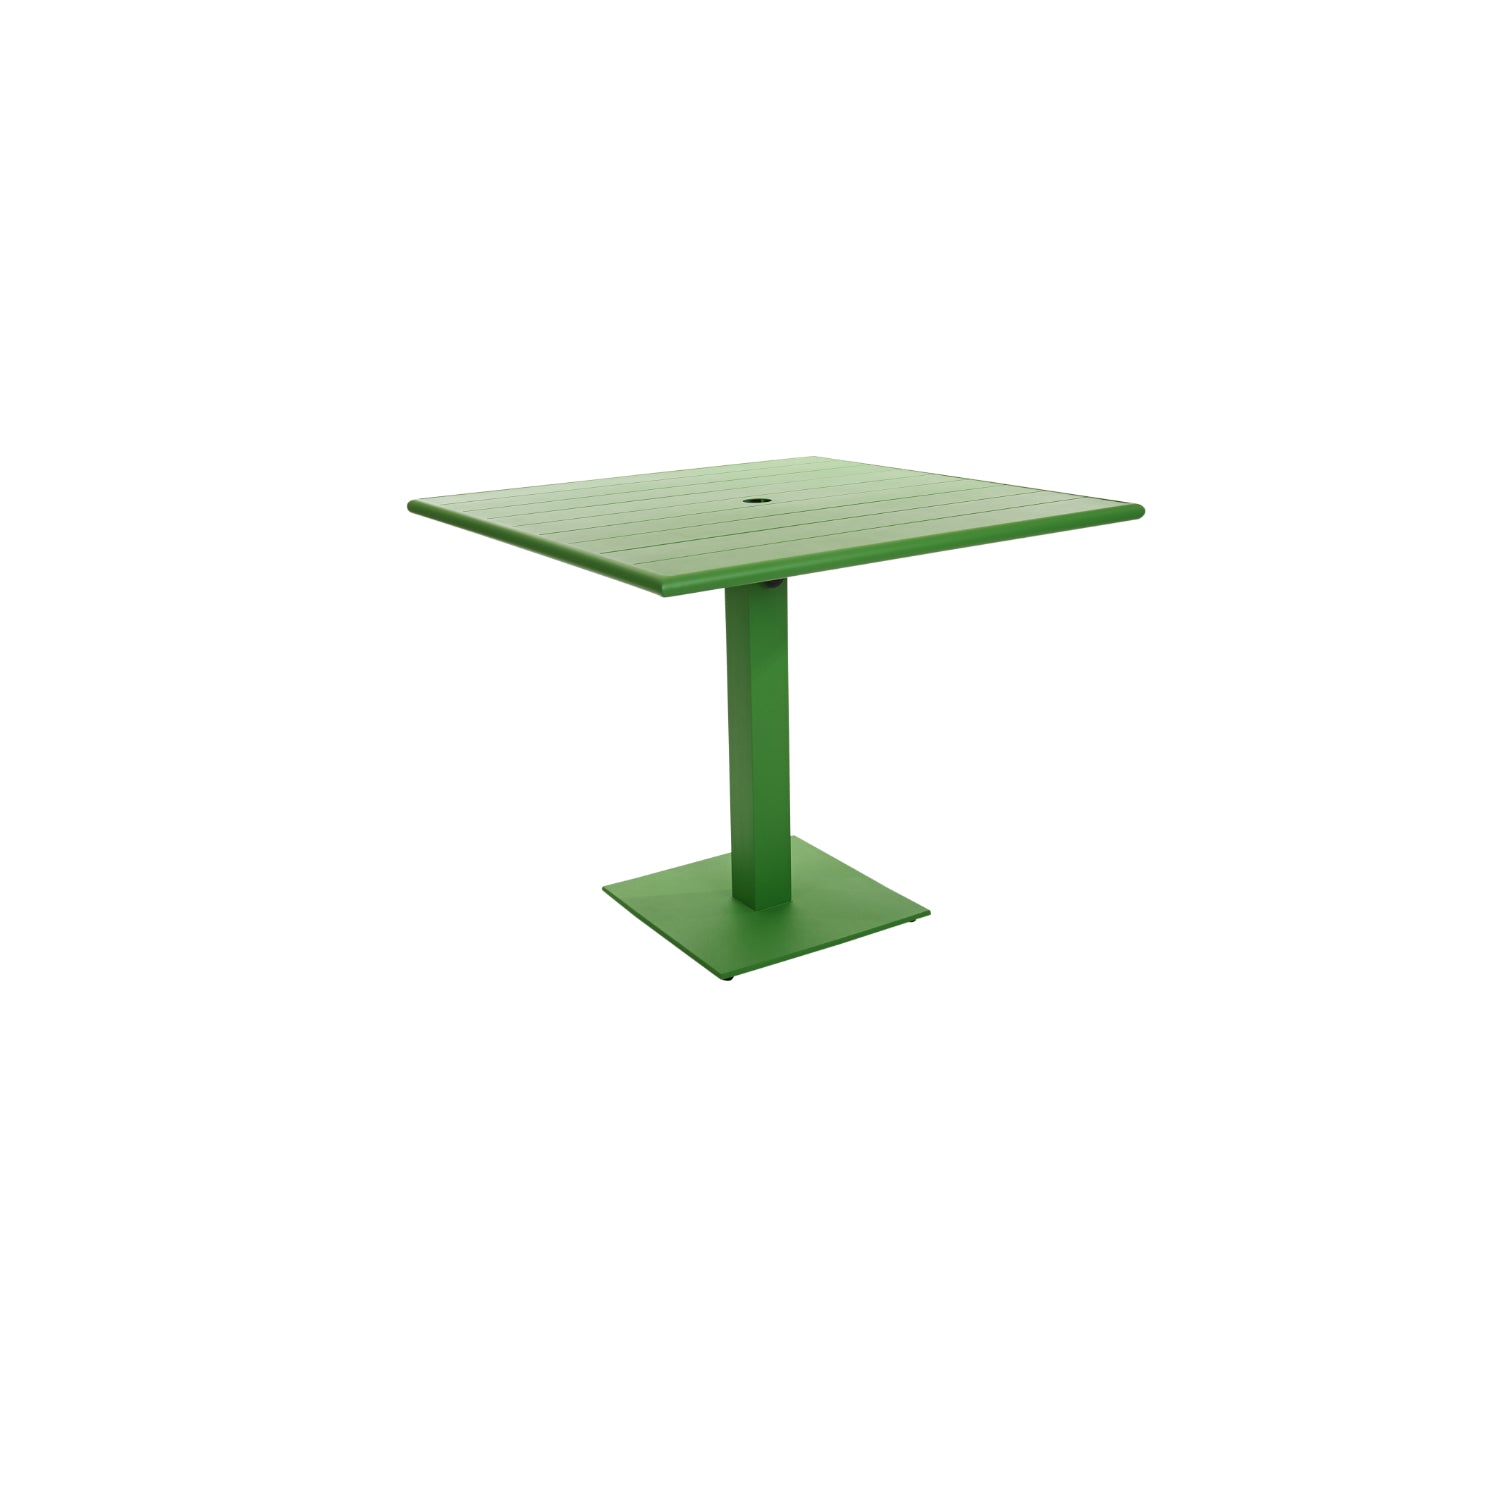 Beachcomber Margate Outdoor/Indoor 36" Square Aluminum Dining Height Table with Umbrella Hole